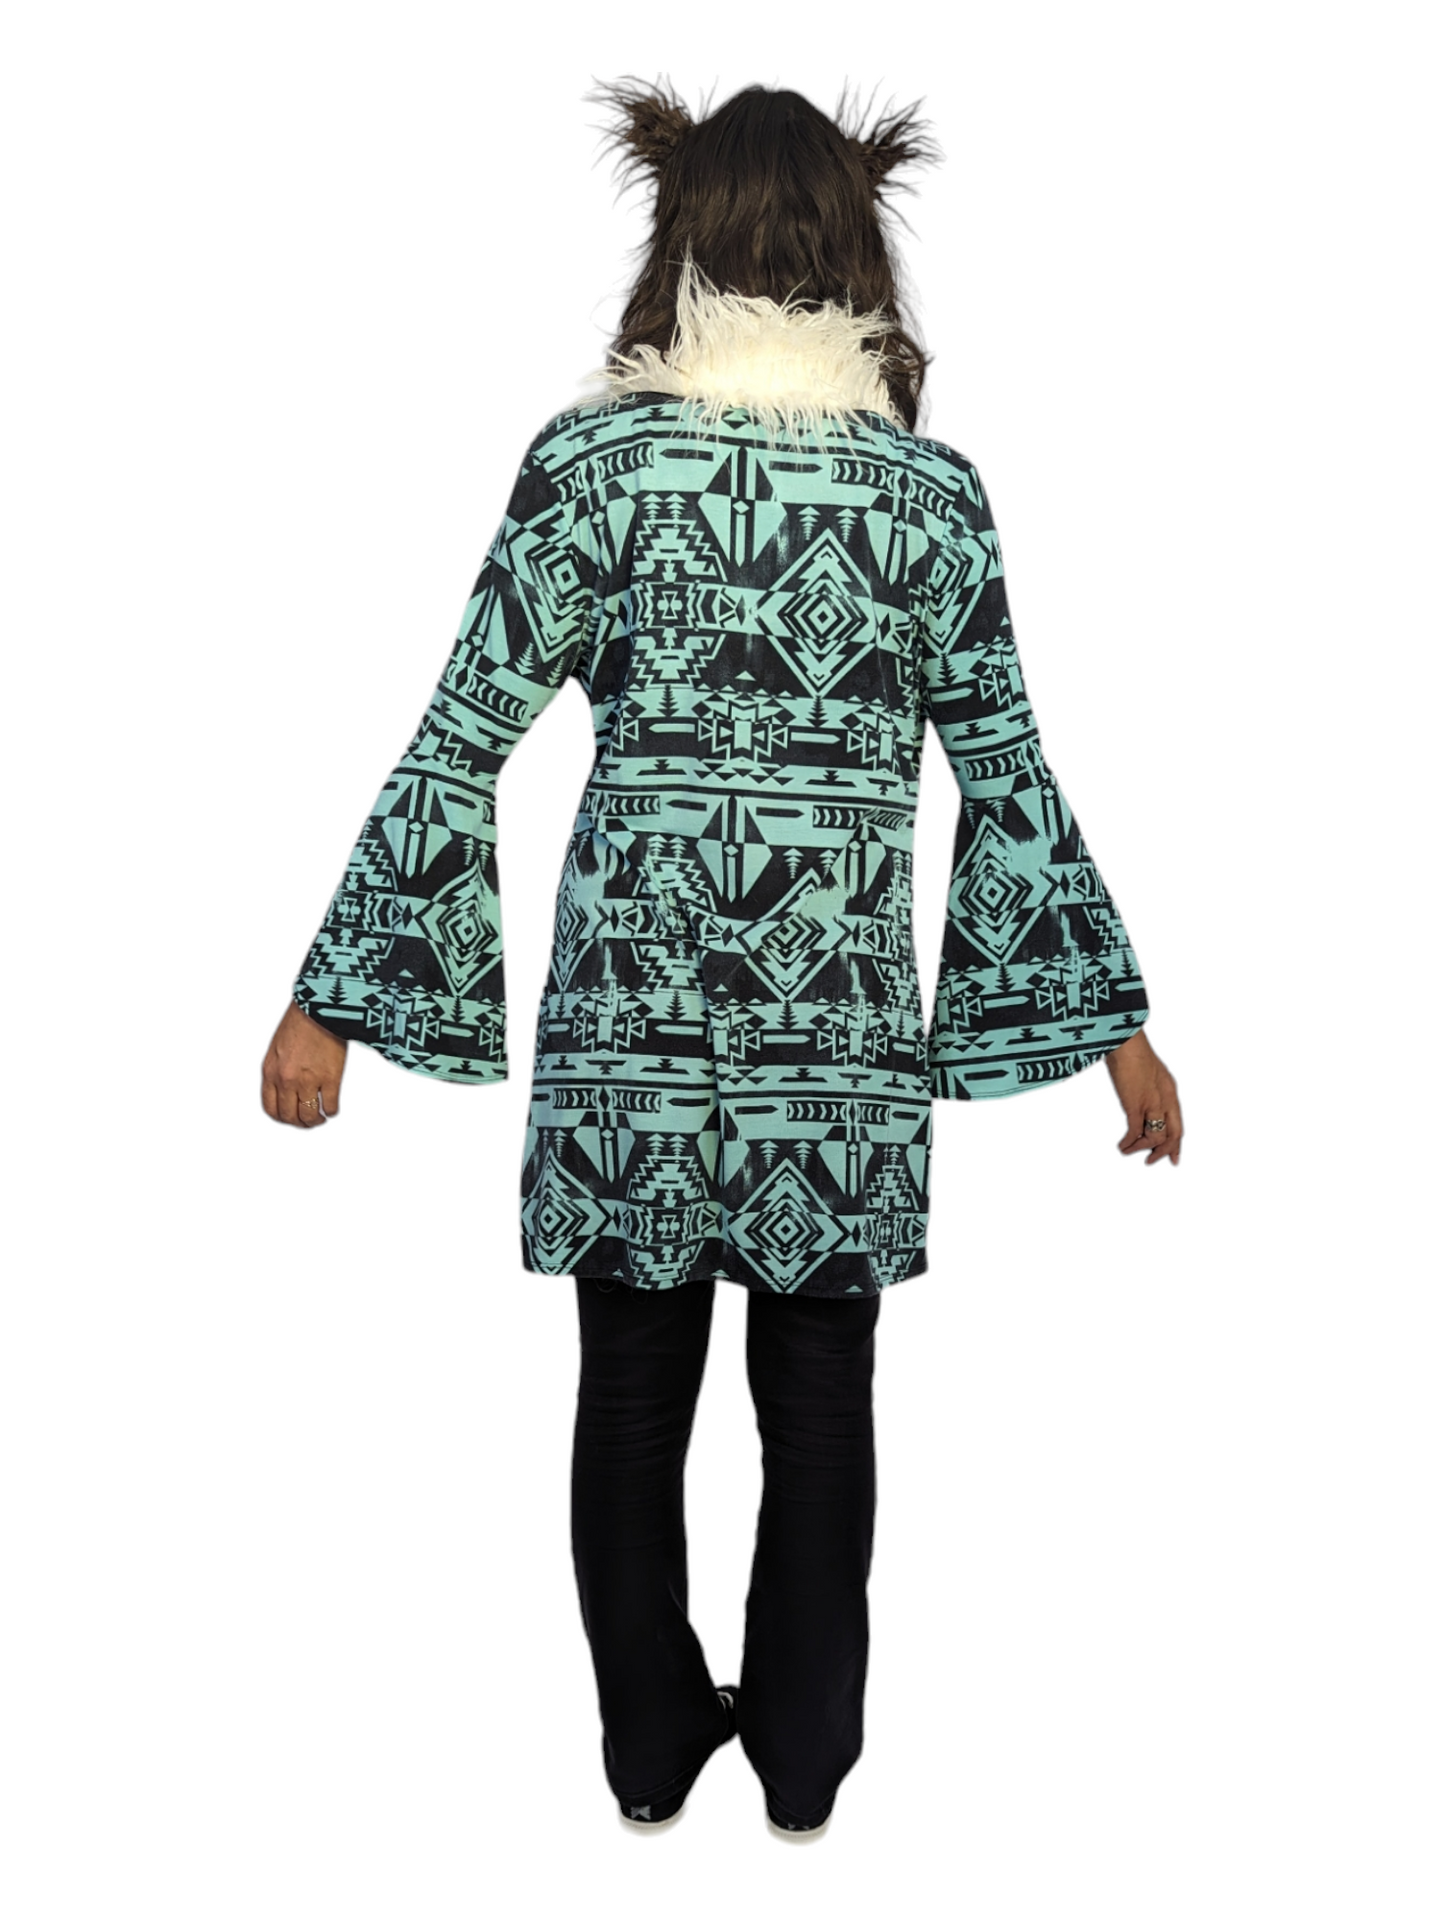 Rear view of woman wearing penny lane coat for music festivals.